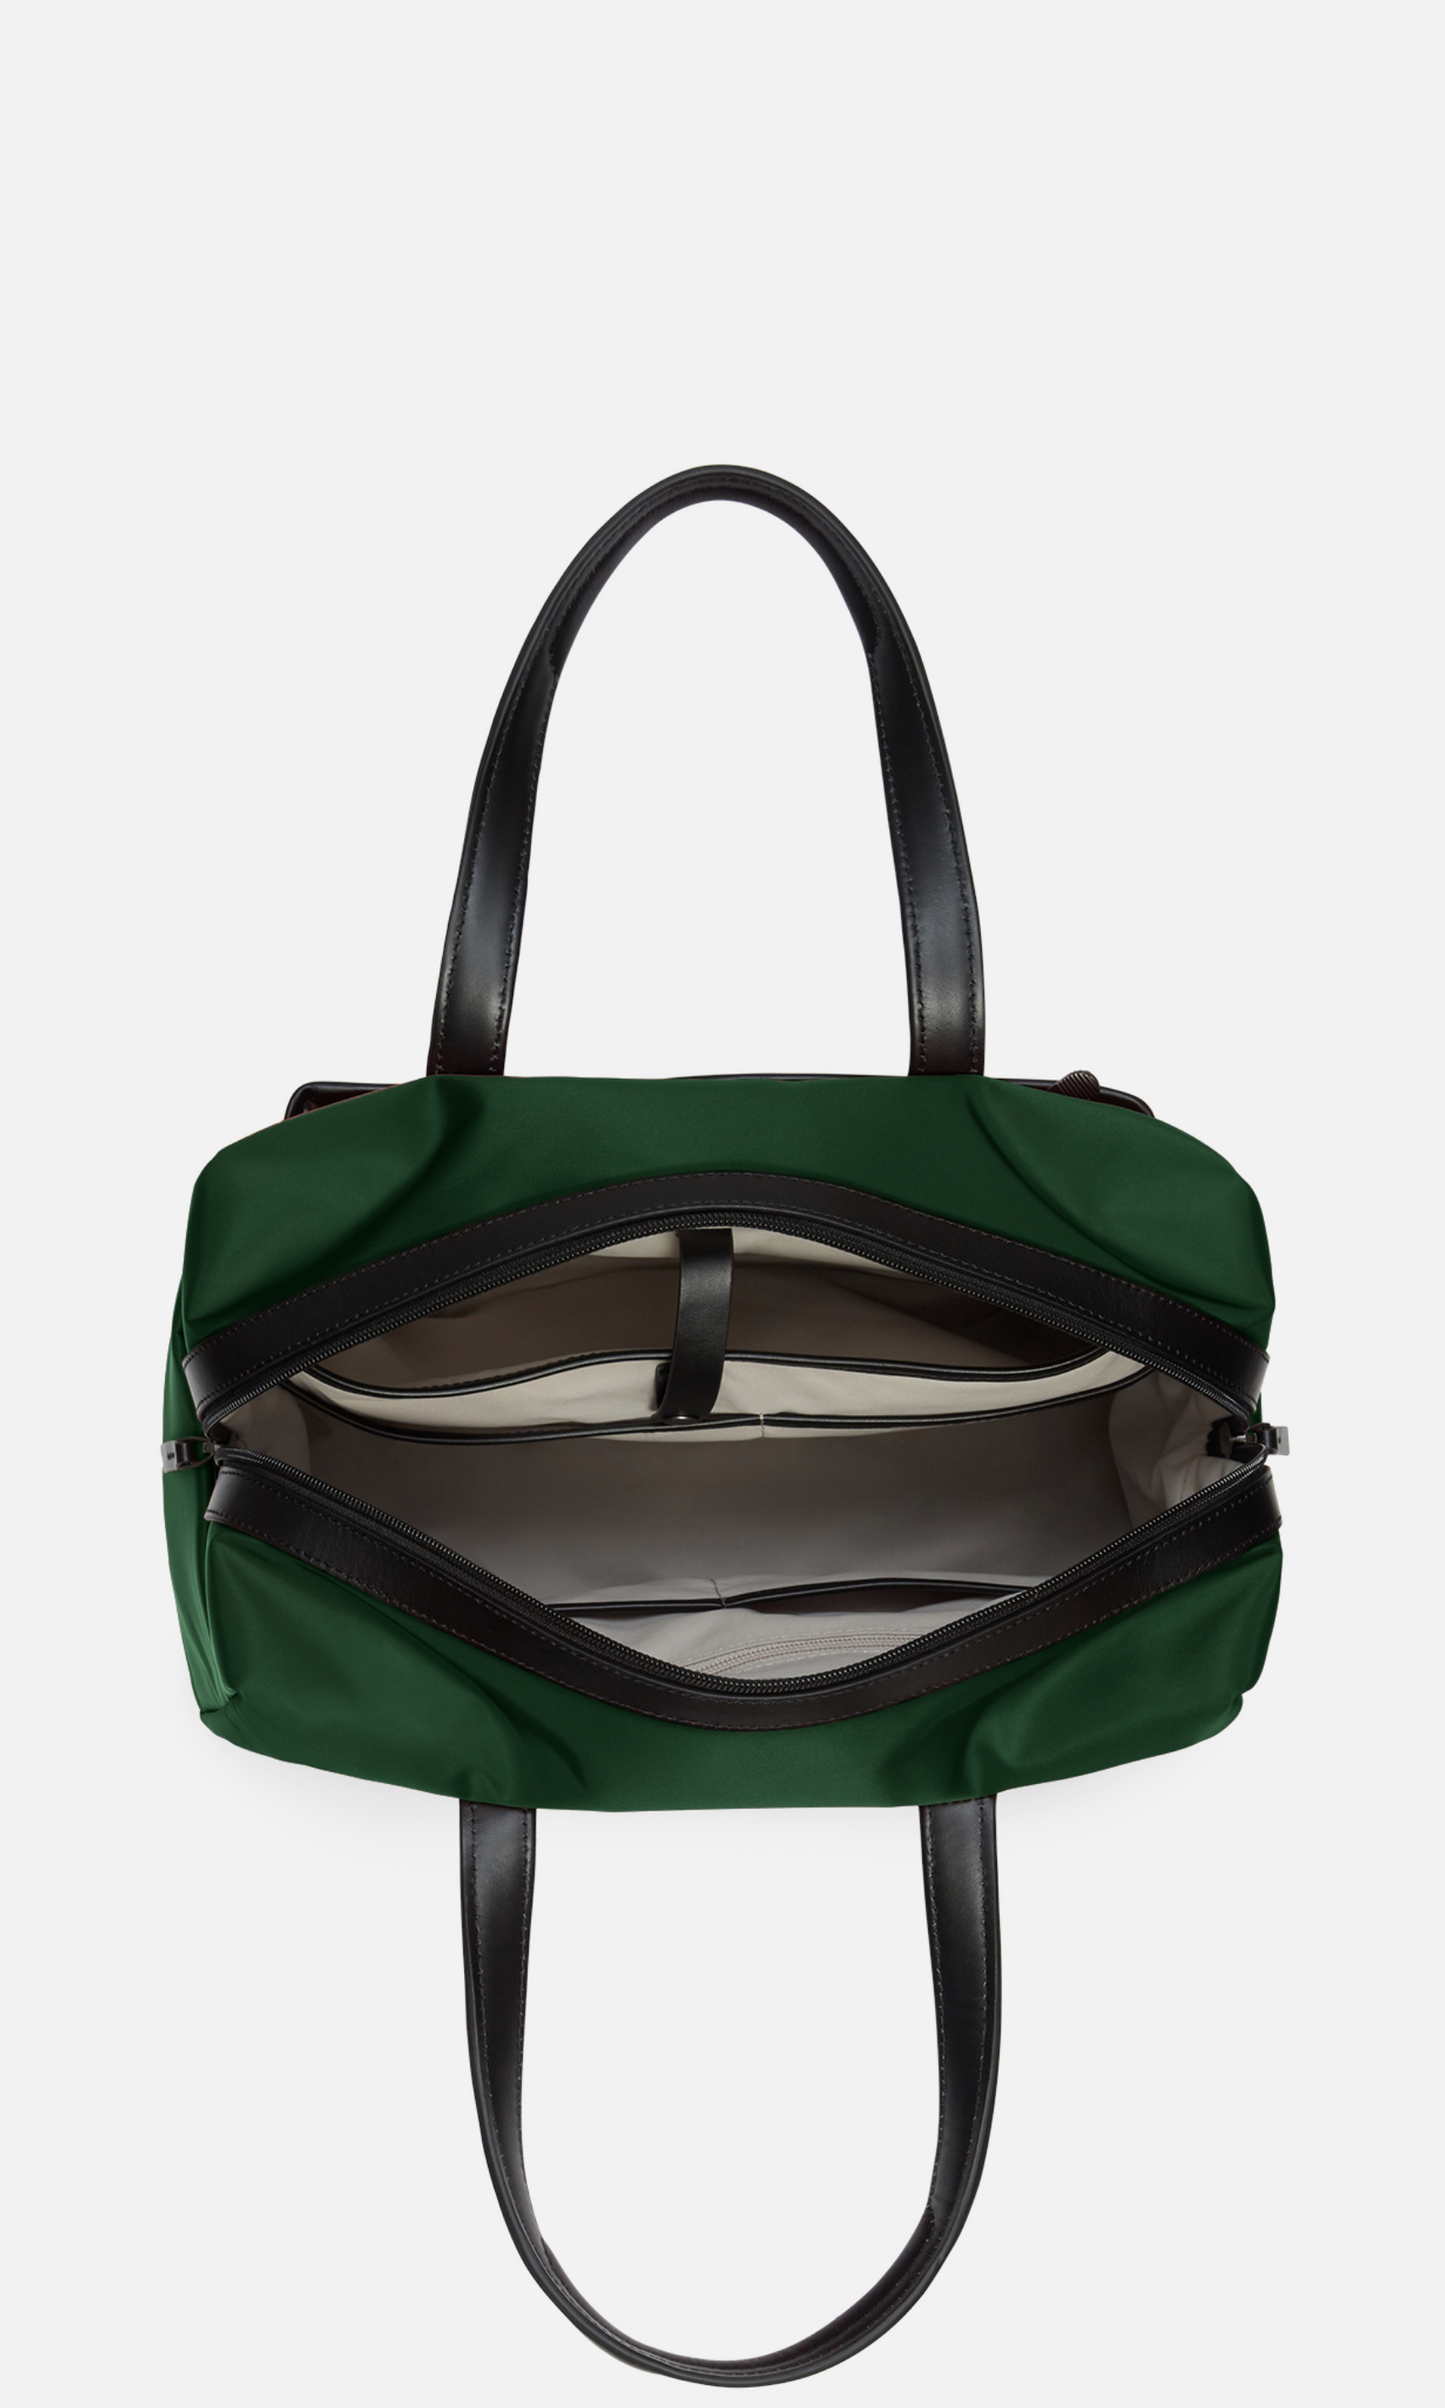 Chelsea overnight bag in woodland green